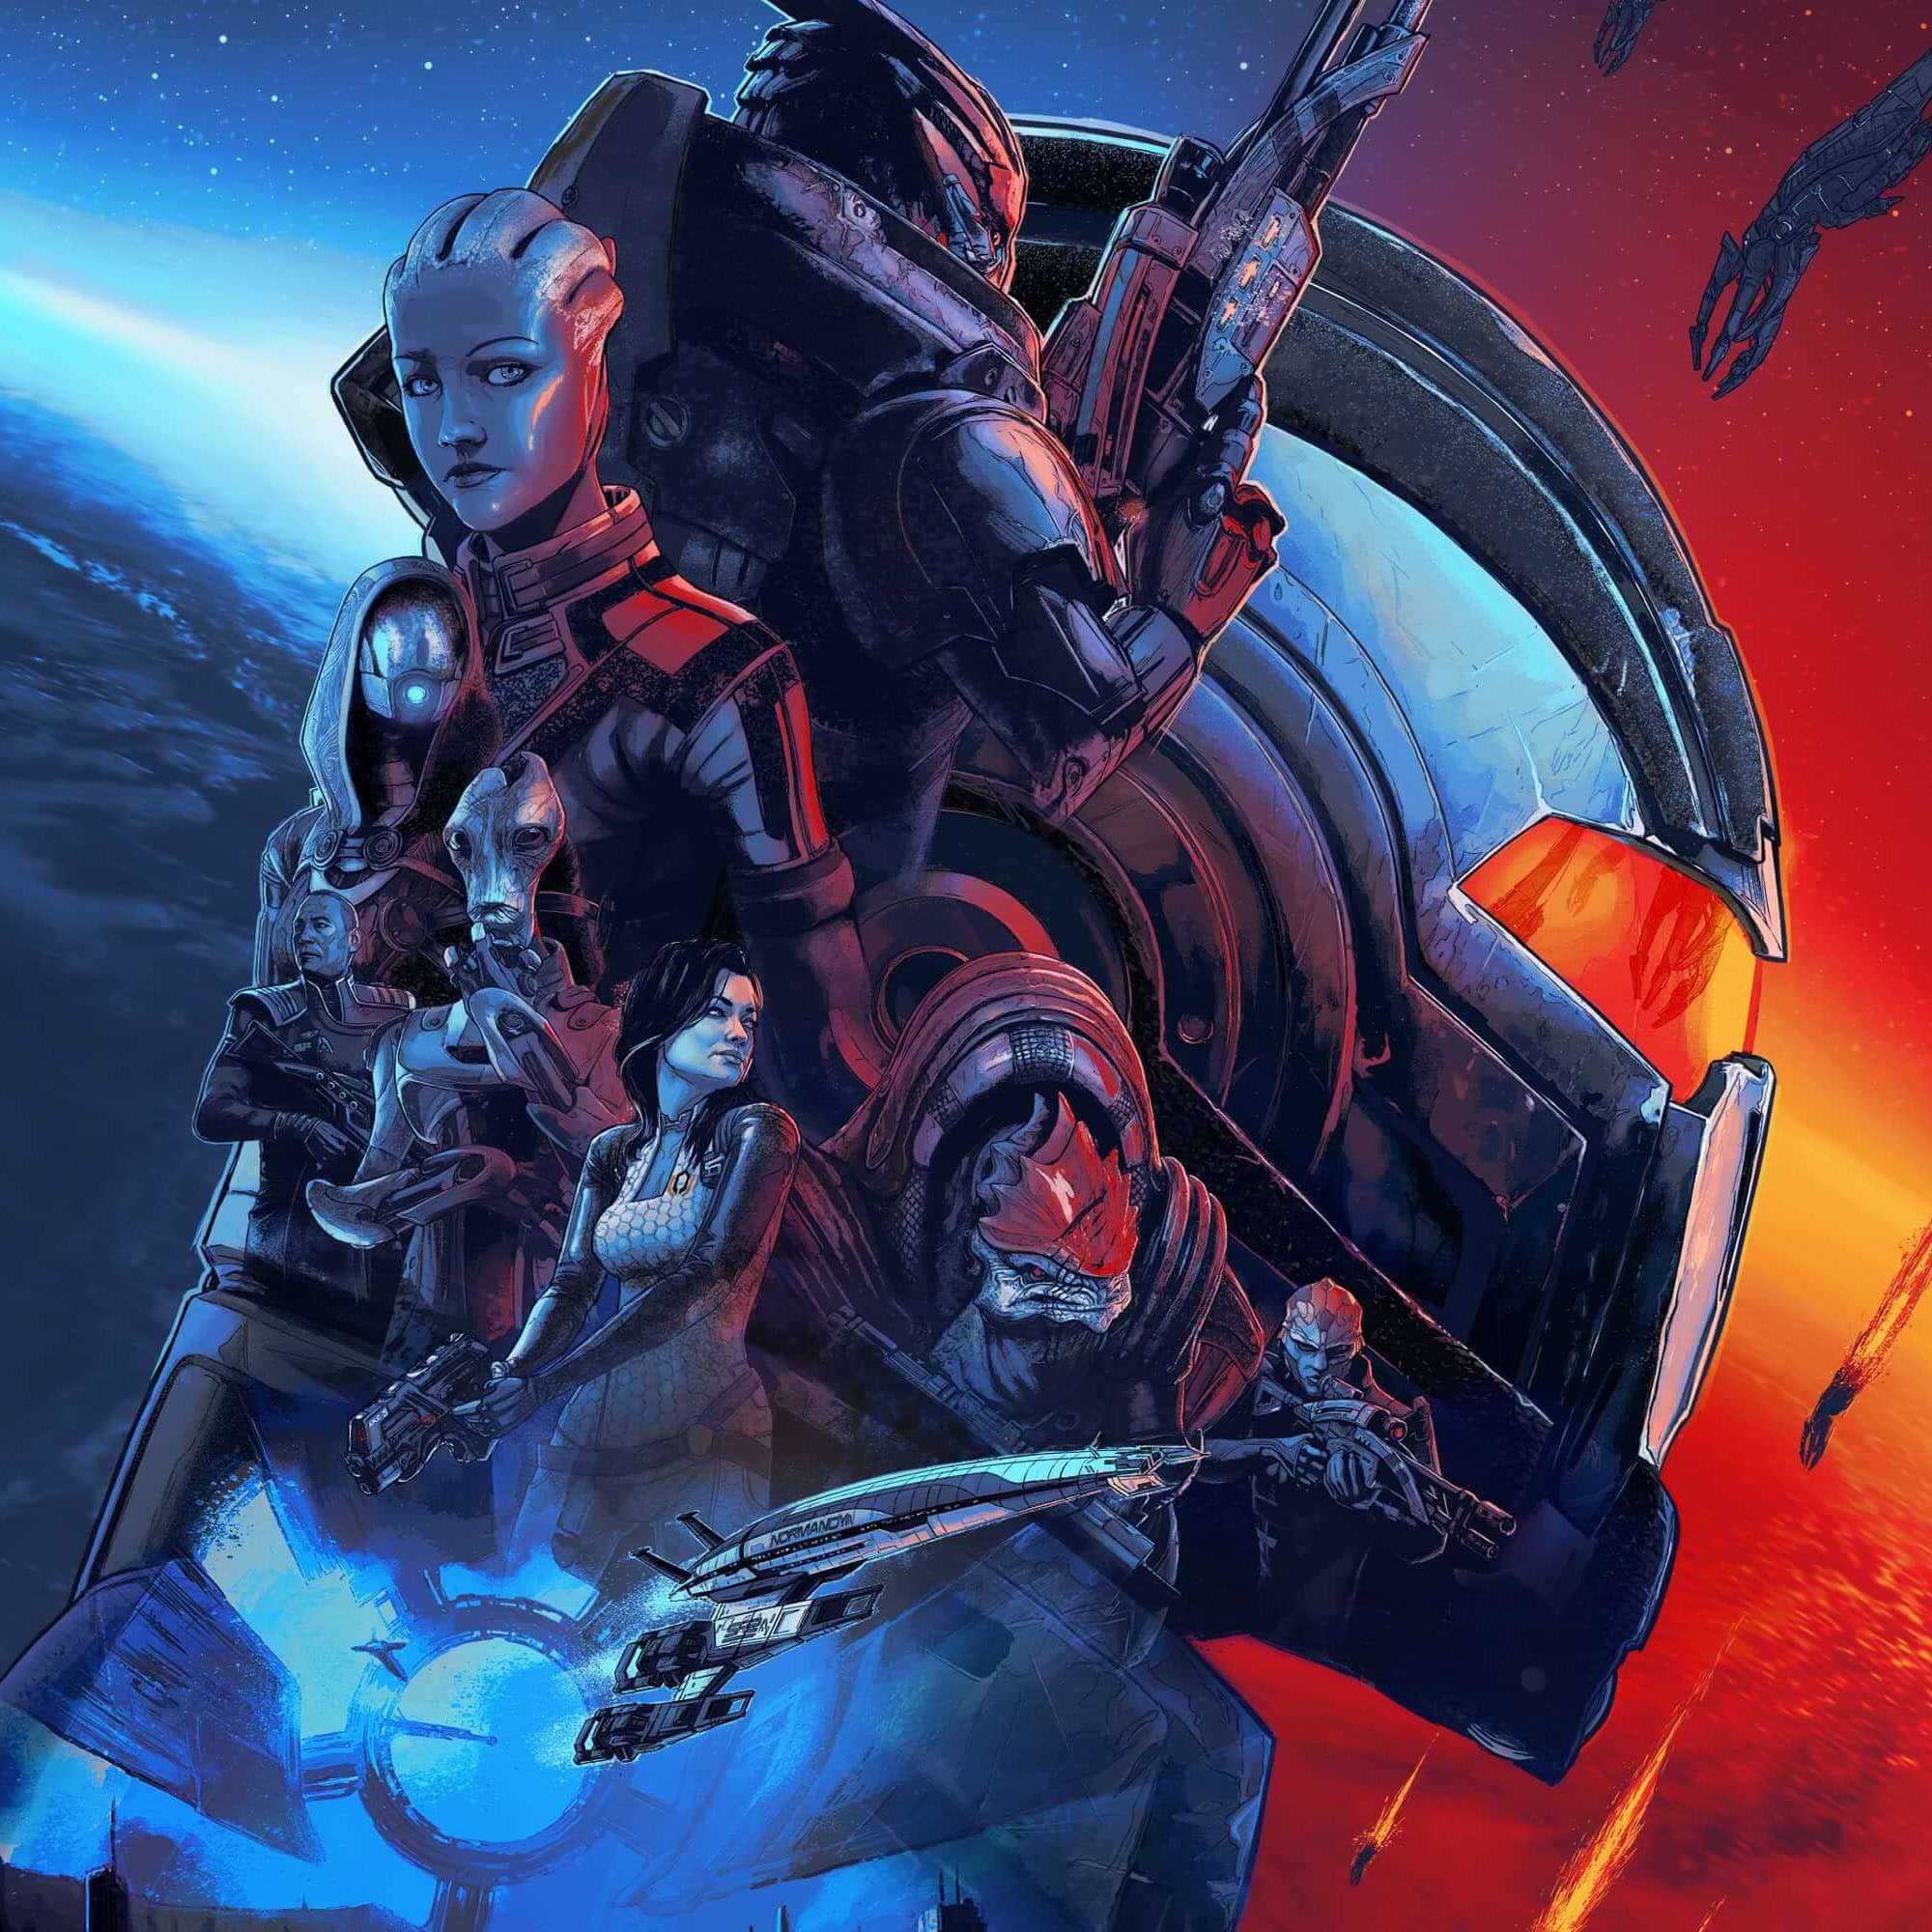 Mass Effect Legendary Edition, 25+ other games free on Prime Day